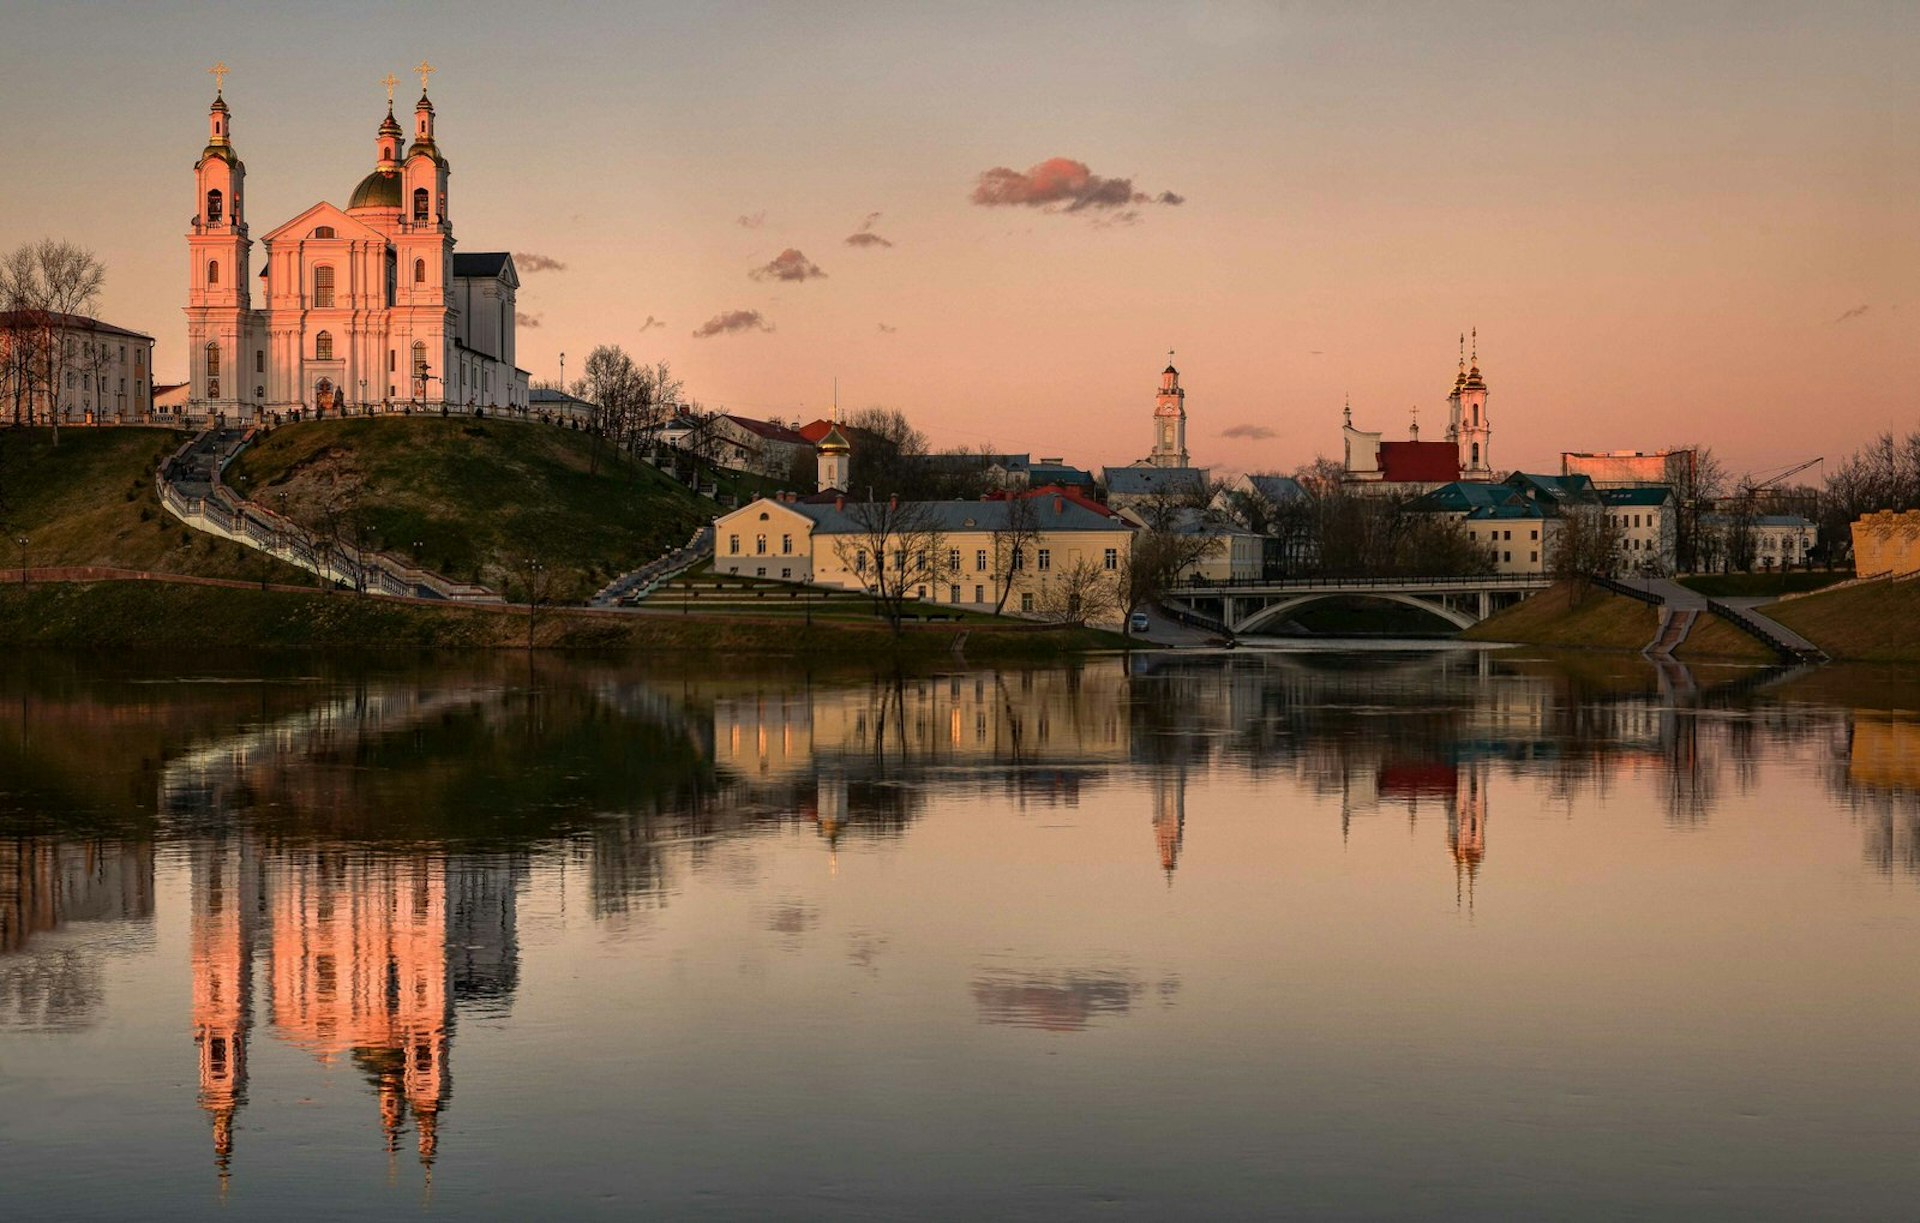 The city of Vitebsk in Belarus reflected in the river at sunset © Kyrill Mukhomedzyanov / 500px 